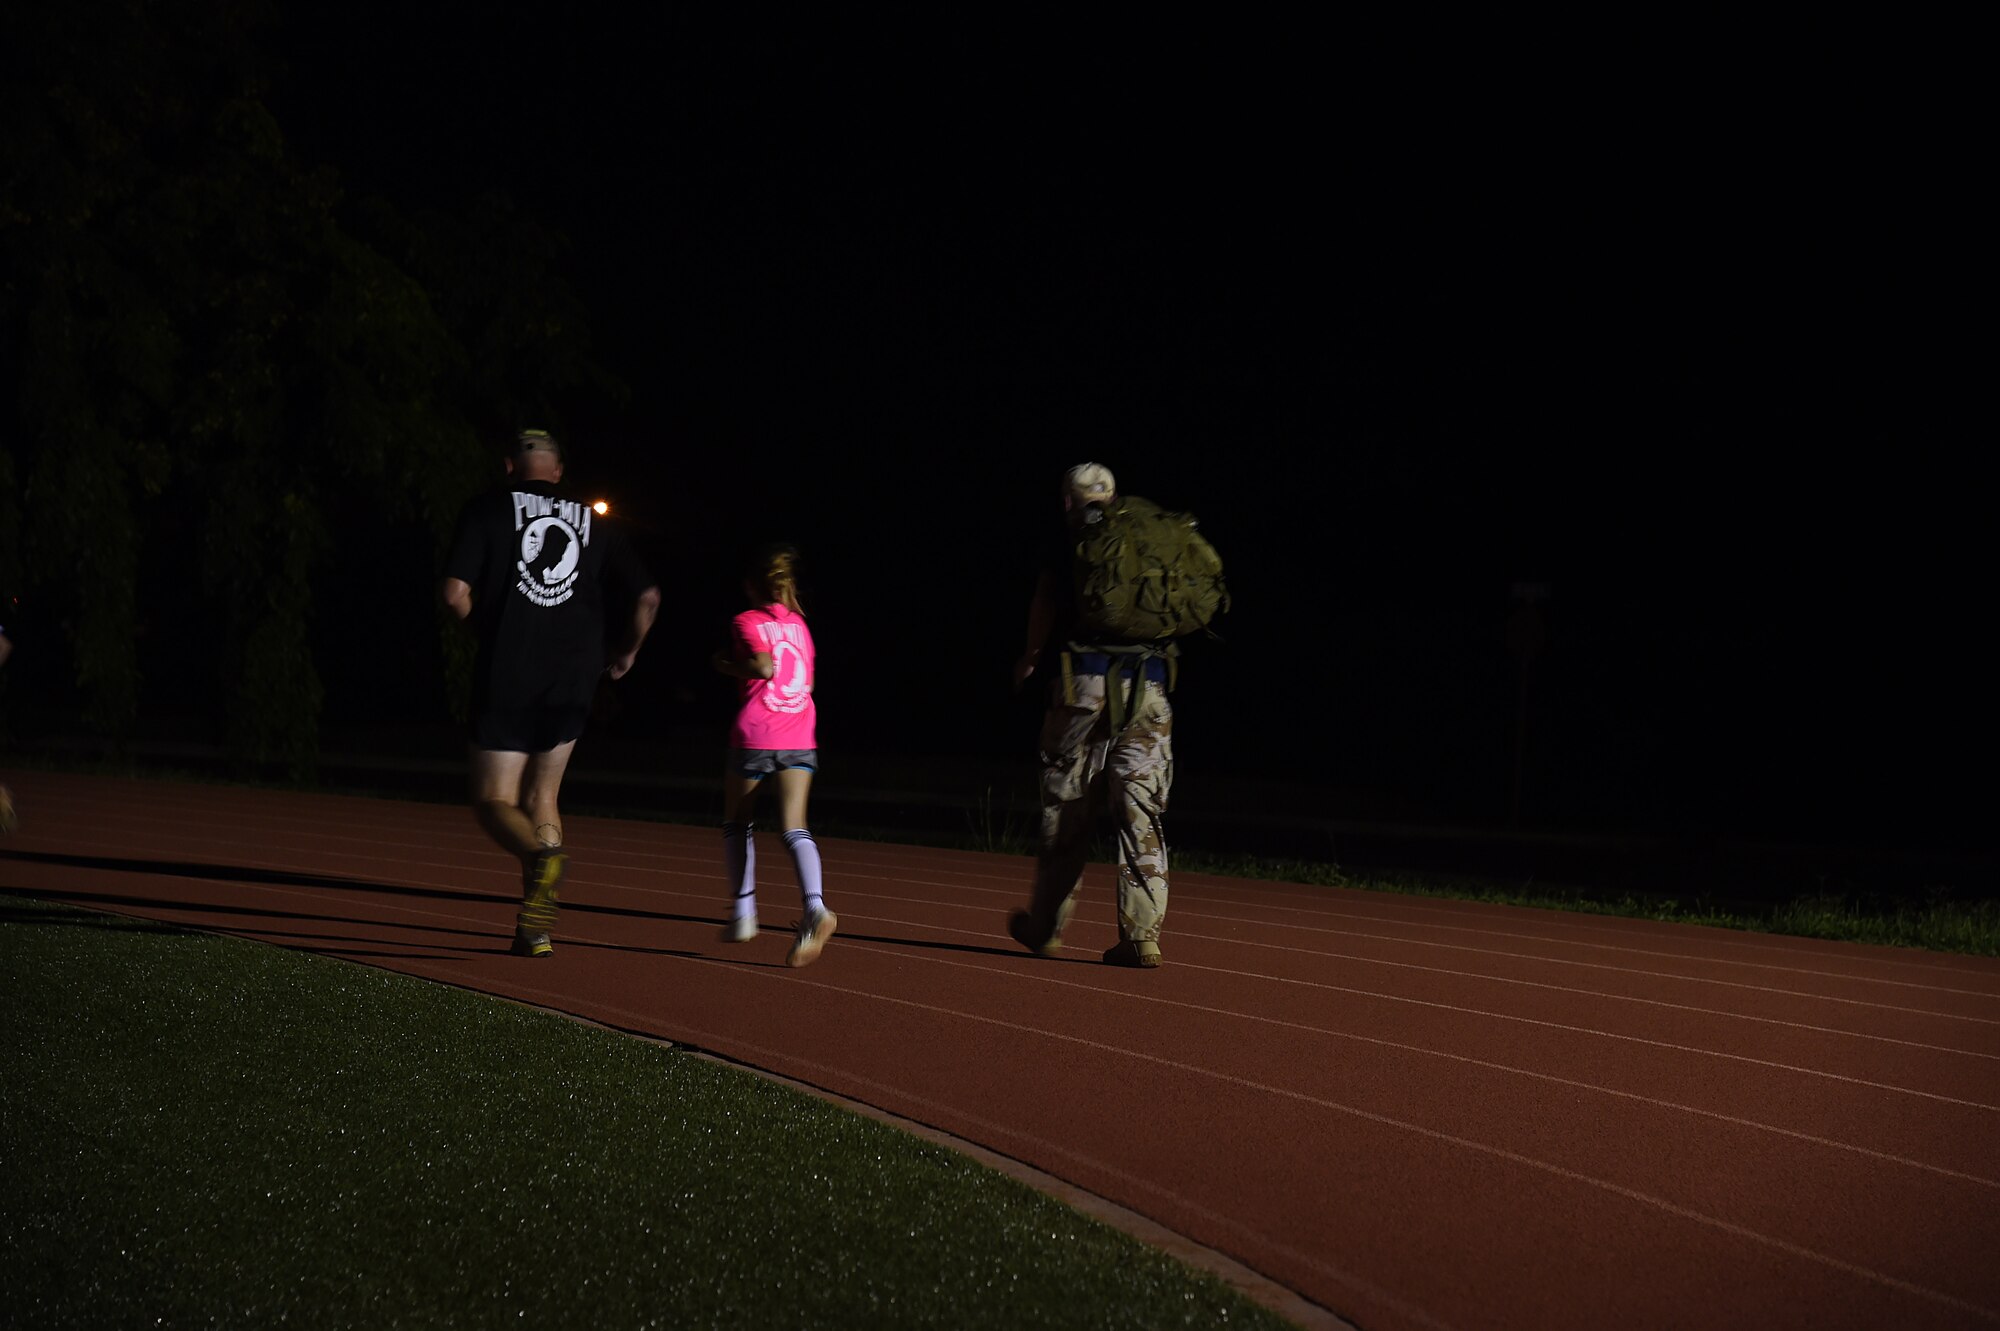 Airmen and family members run during the 24-hour Prisoner of War and Missing In Action remembrance run on Joint Base Pearl Harbor-Hickam, Hawaii, Sept. 17, 2015. The 24 hour POW/MIA remembrance run was organized by the 25th Air Support Operations Squadron as a part of POW/MIA week and National POW/MIA Day. Every year the nation pauses on the third Friday of September to remember the sacrifices and service of prisoners of war. There are 83,344 Americans still unaccounted-for across the Defense Department. (U.S. Air Force photo by Tech. Sgt. Aaron Oelrich/Released)   